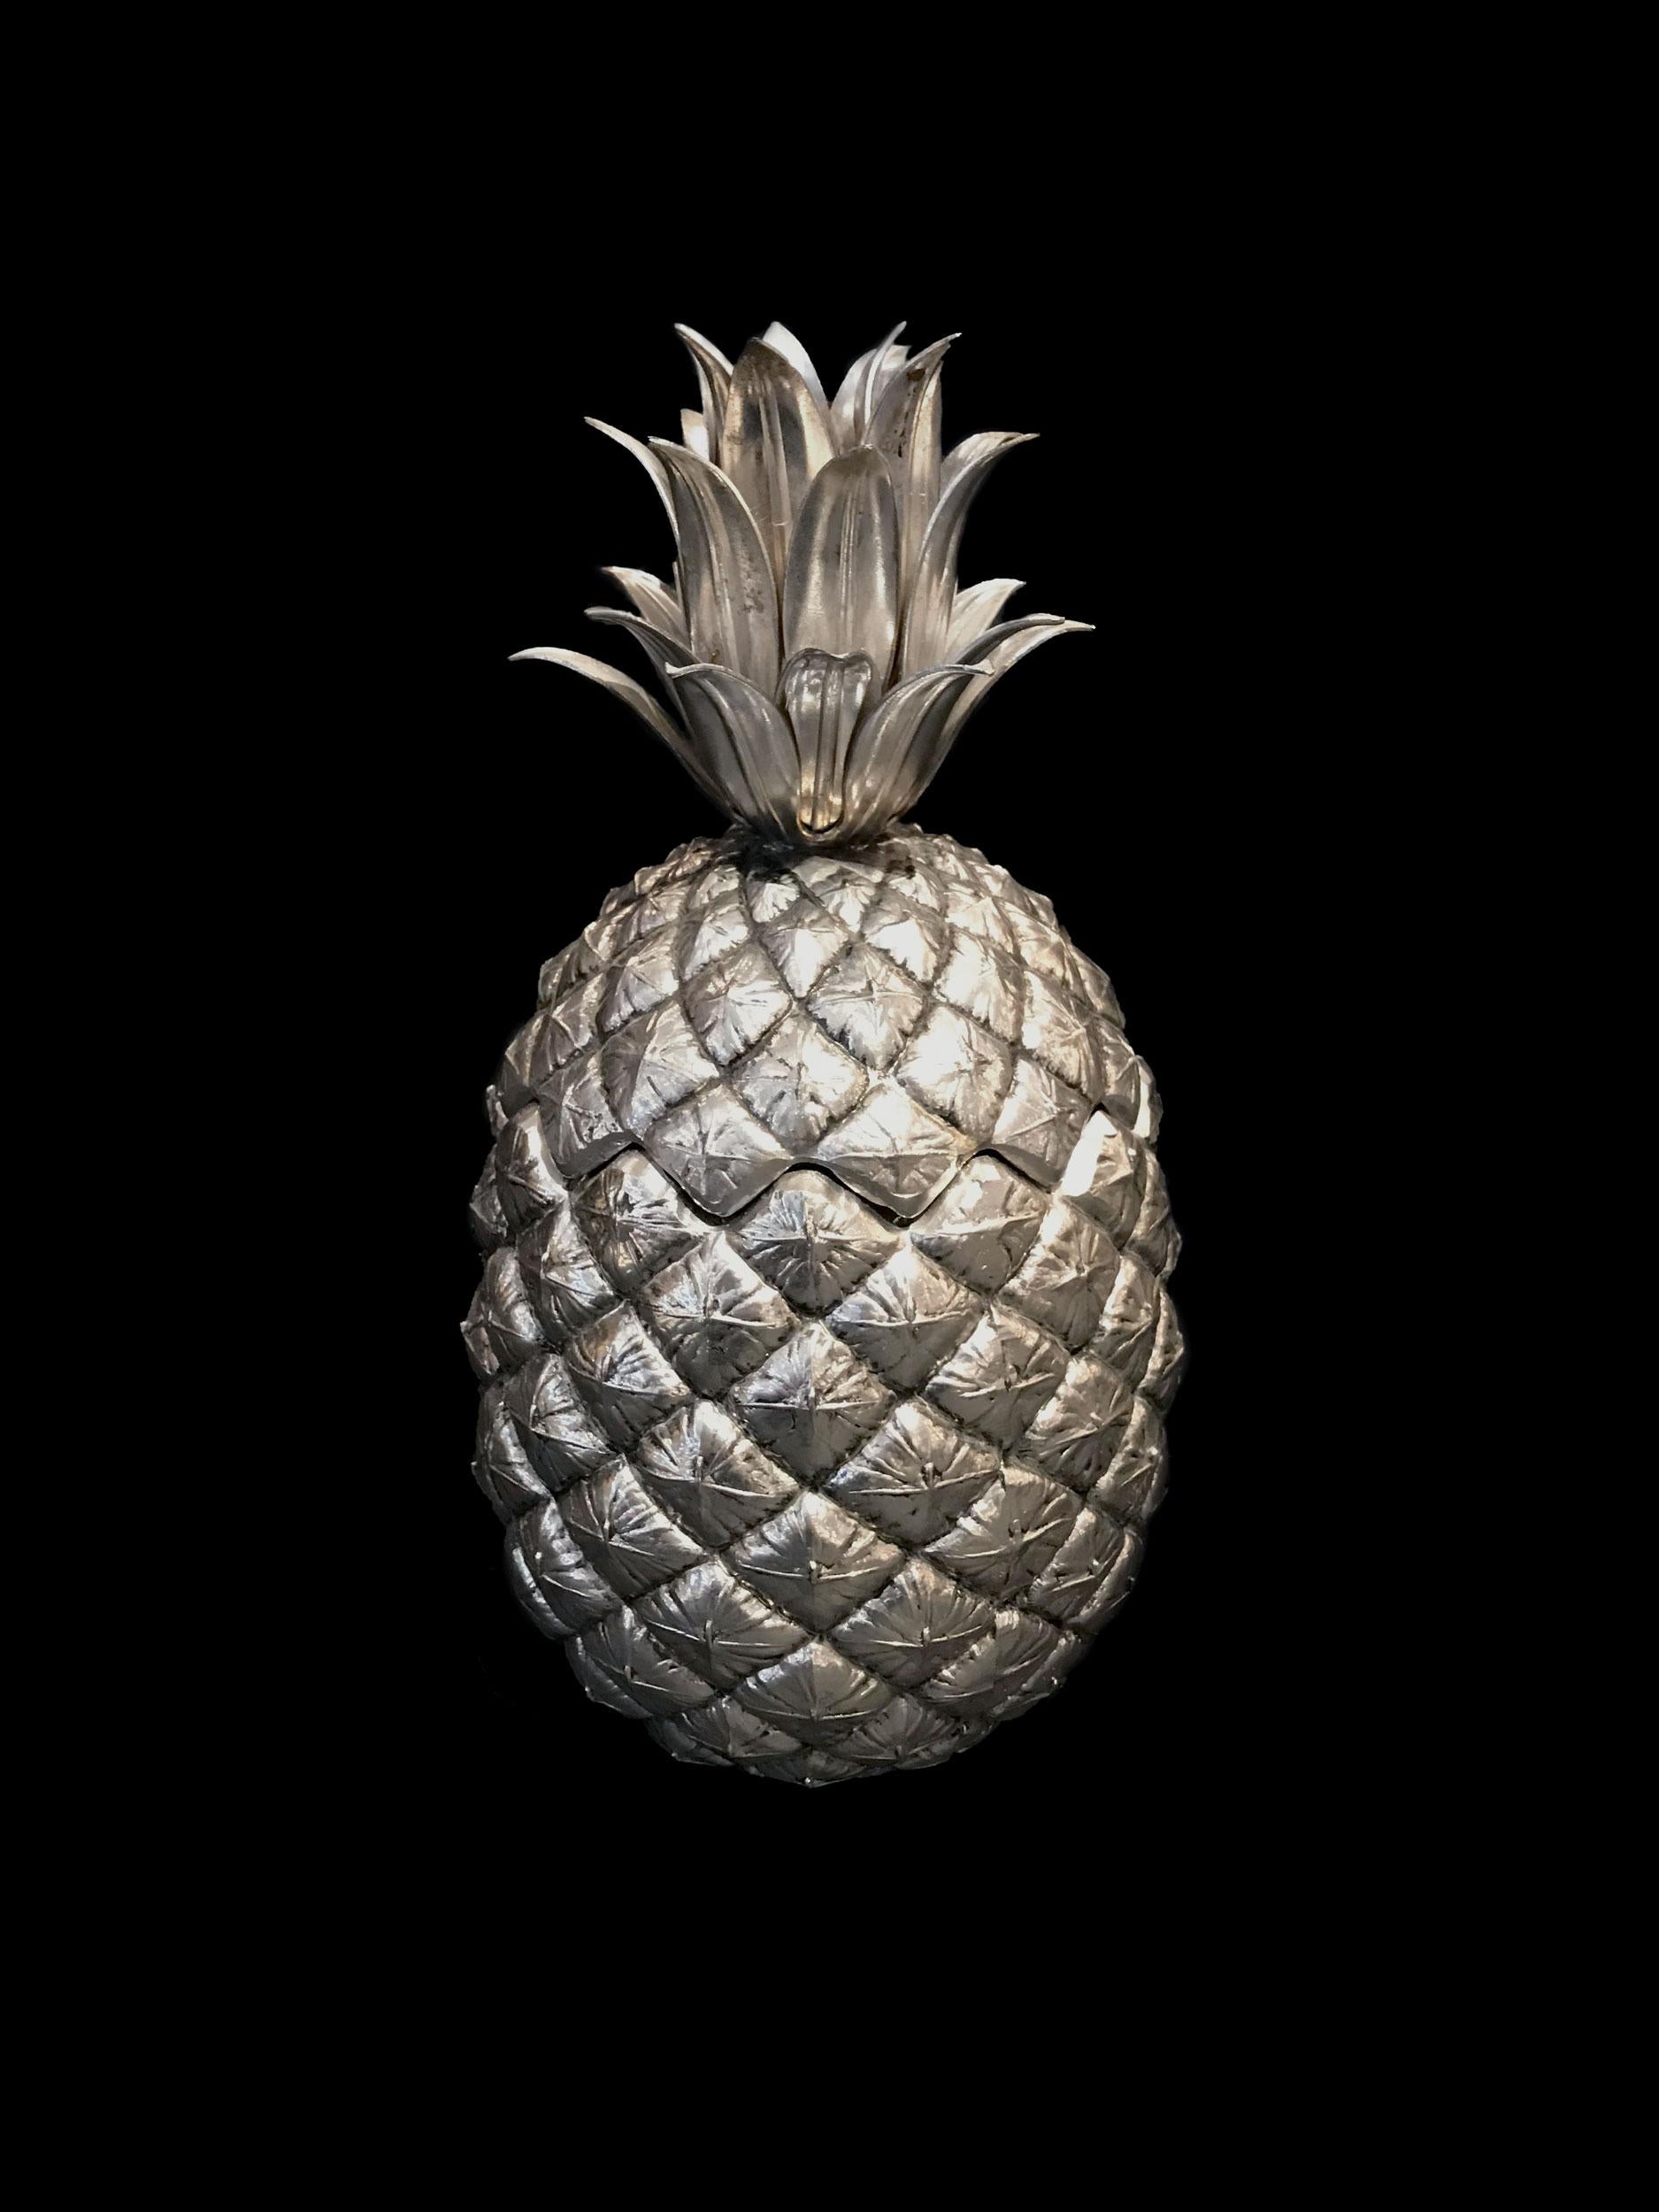 The pineapple ice bucket, designed by Mauro Manetti is world-famous and even has been copied many times !
The original and first productions had inside made of metal and the outside of silvered cast aluminum which is silver plated.
Mark beneath